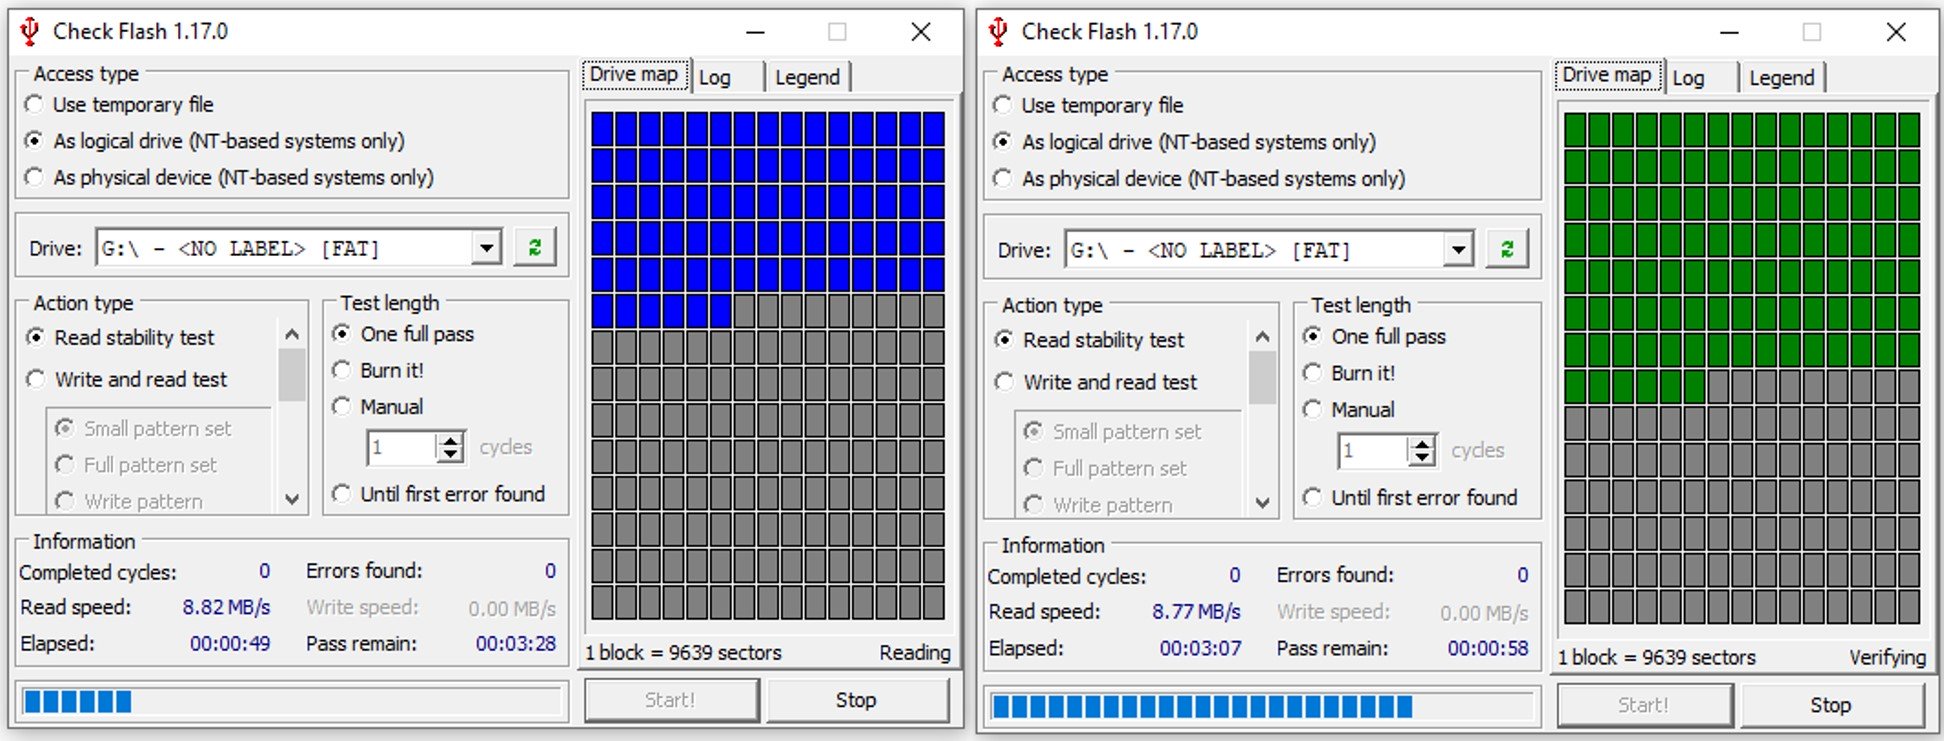 Screen capture of Check Flash software during an analysis of a USB flash drive and showing the blocks being read (in blue) and verified (in green).